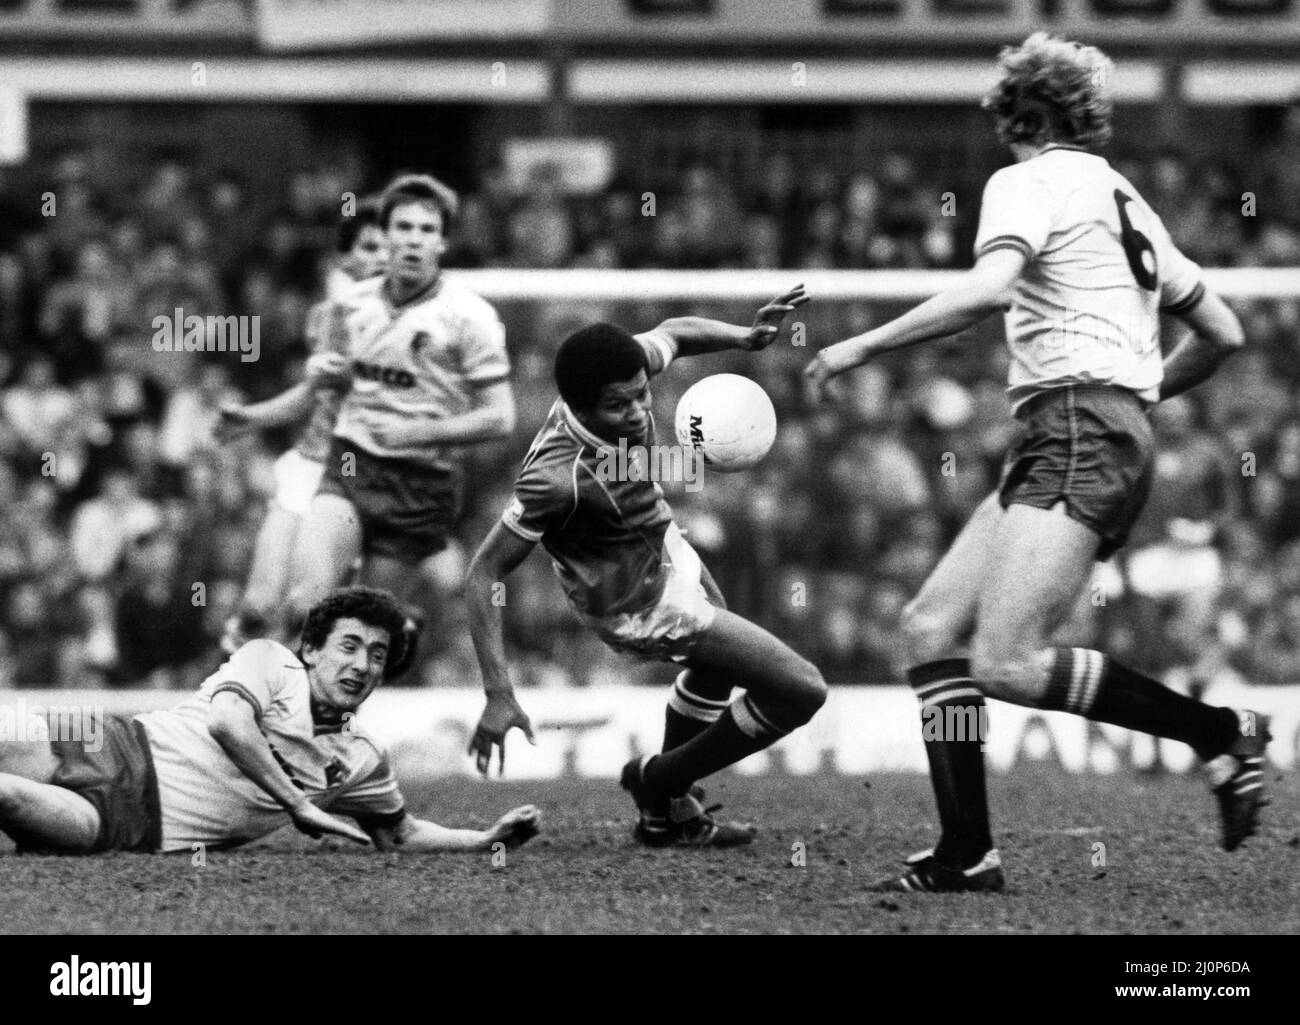 Birmingham City's Howard Gayle loses his way and takes a tumble watched by Rostron (left) and Franklin (right. Birmingham City v Watford, FA Cup Quarter-final, final score 3-1 to Watford. 10th March 1984. Stock Photo